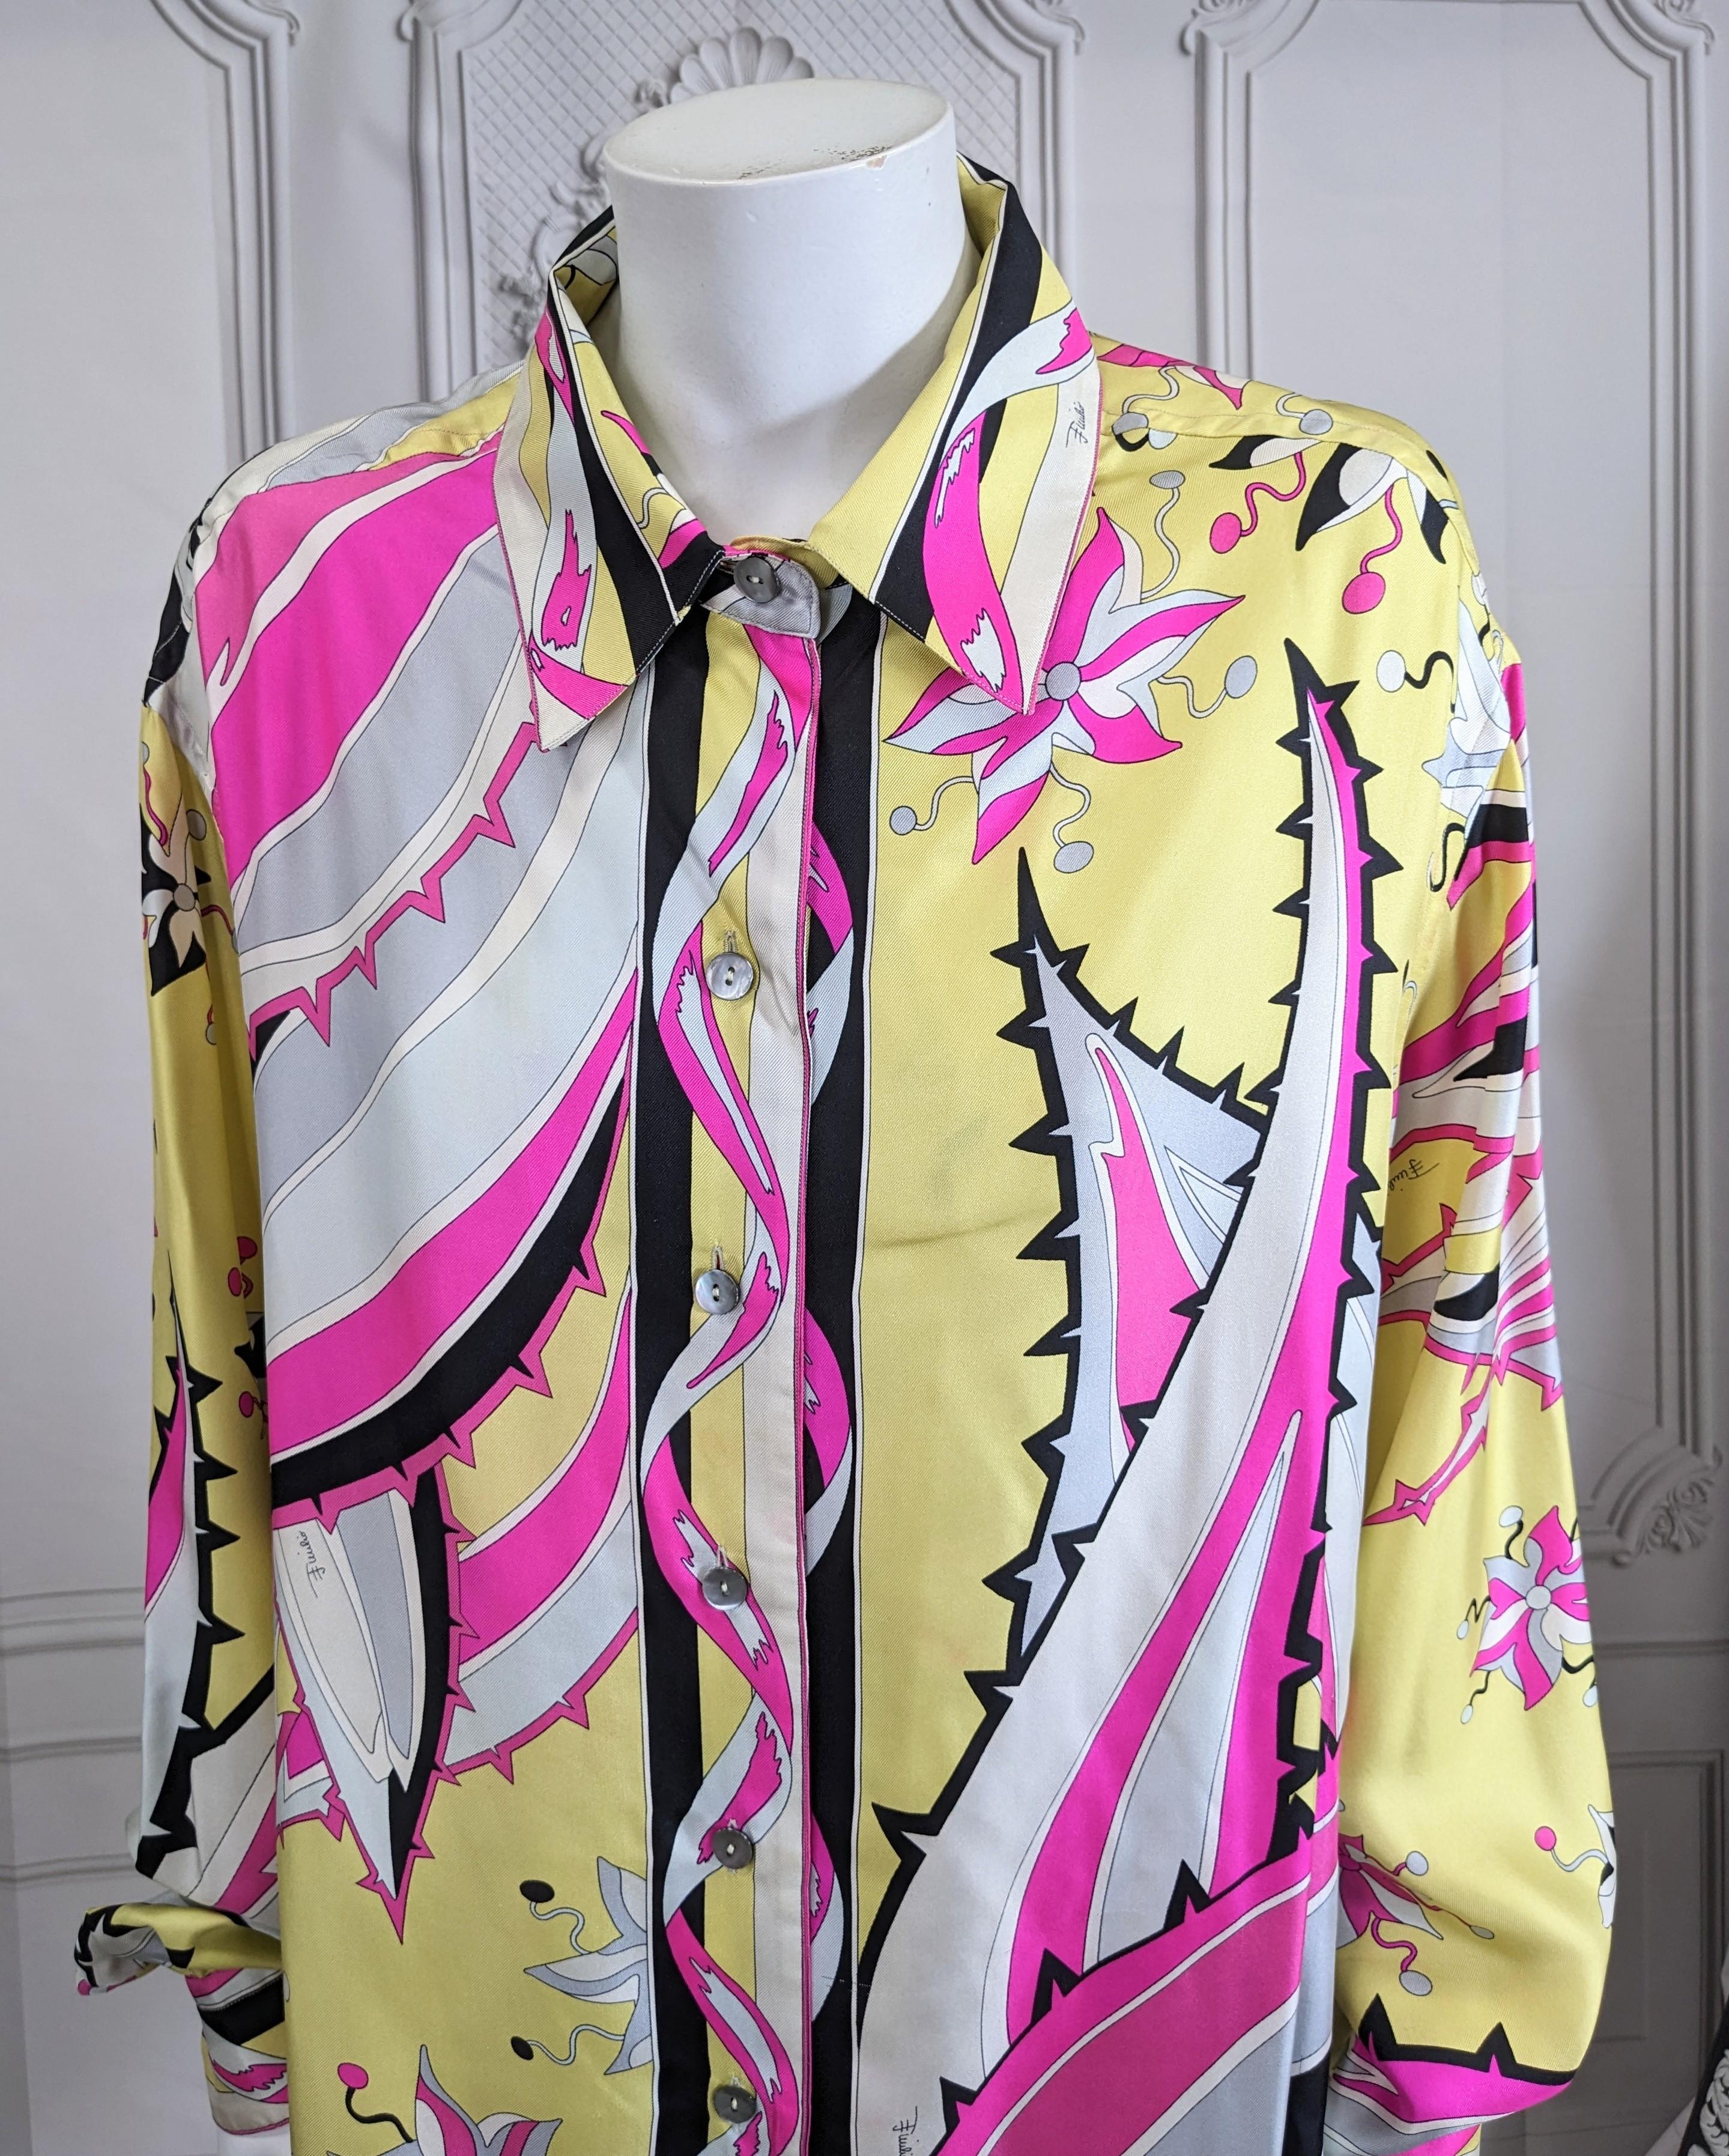 Pucci Silk Twill Print Shirt In Good Condition For Sale In New York, NY